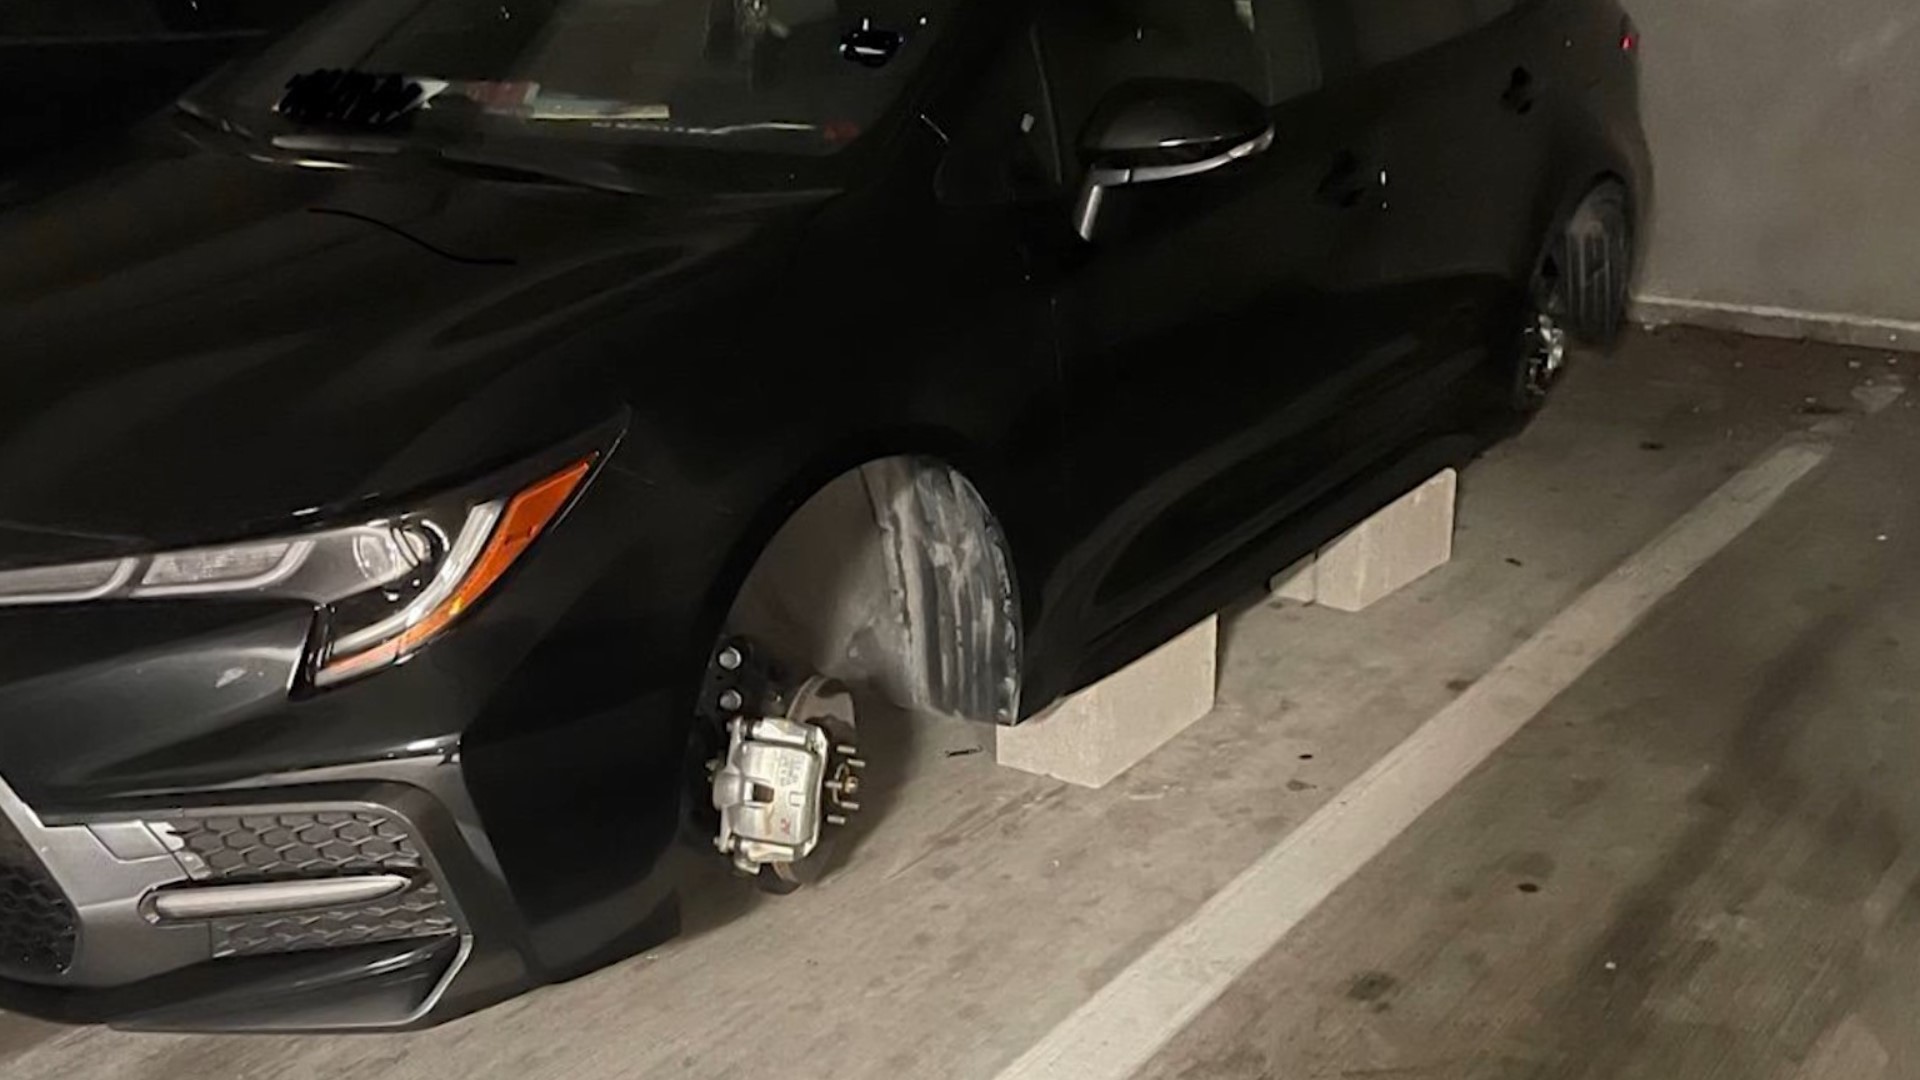 "They [thieves] only want to get paid in cash. They're selling a Corolla wheel worth $120 for $20, these are all those tells," Massoudi told WFAA.